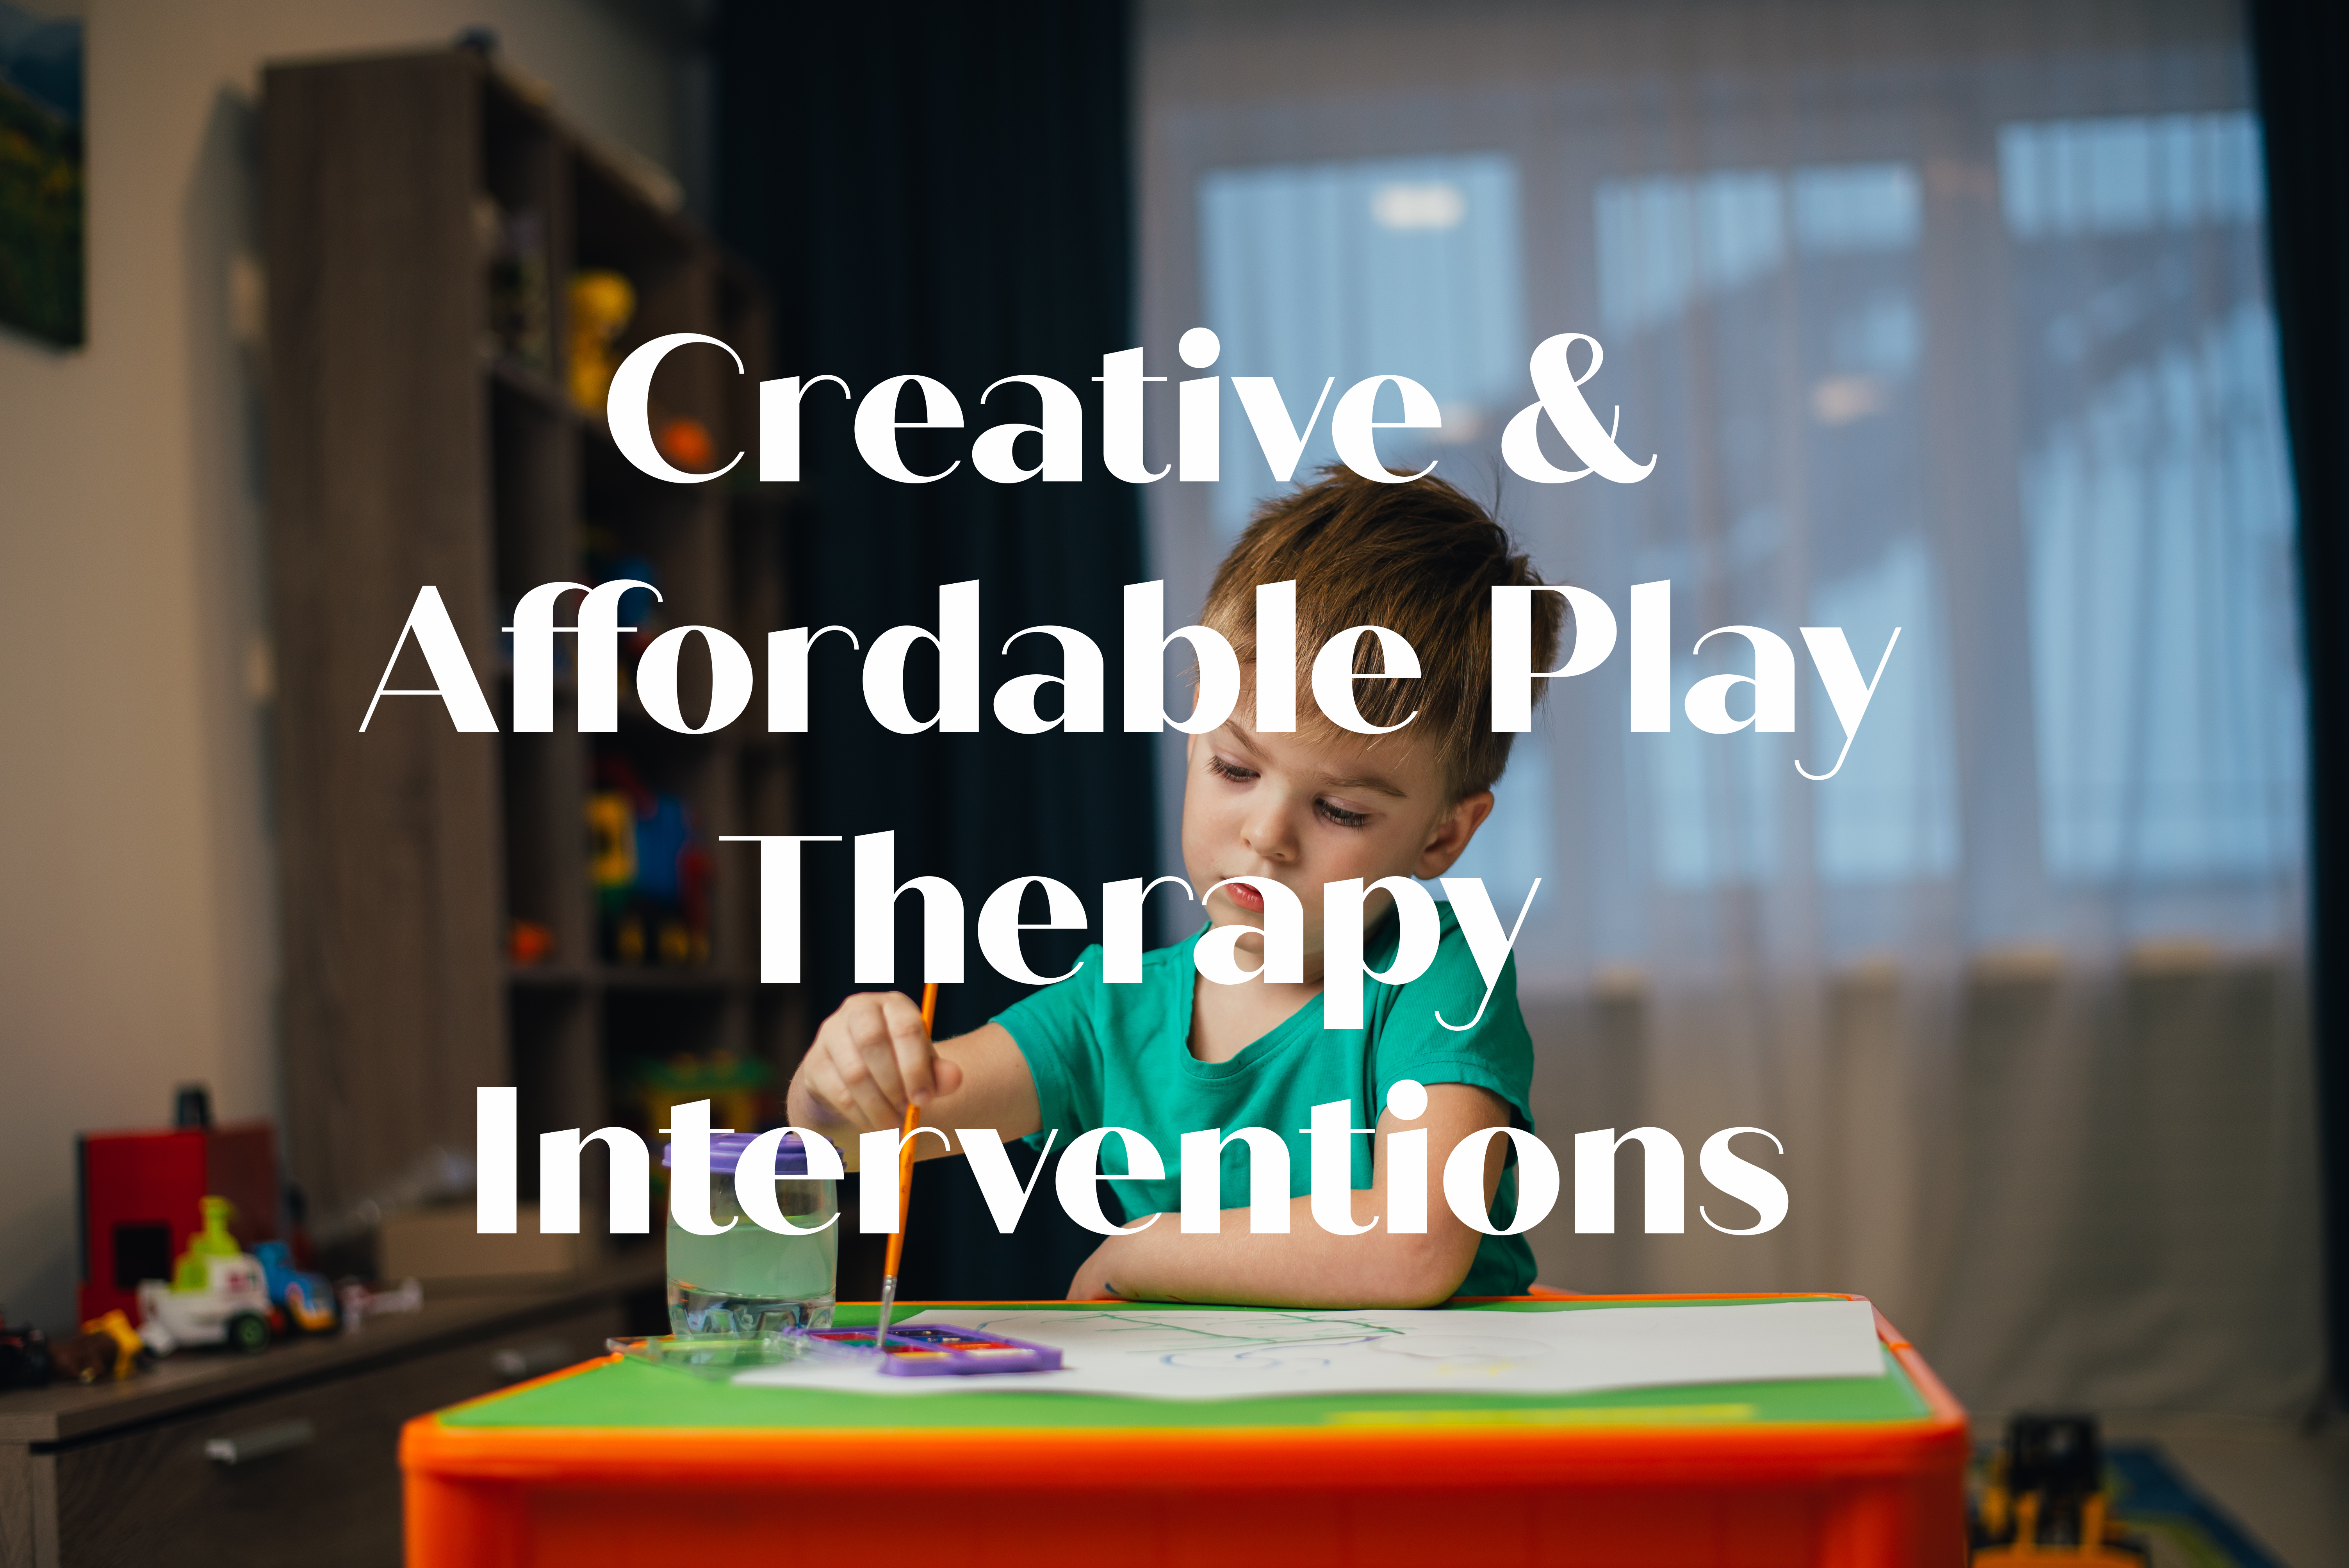 Creative & Affordable Play Therapy Interventions